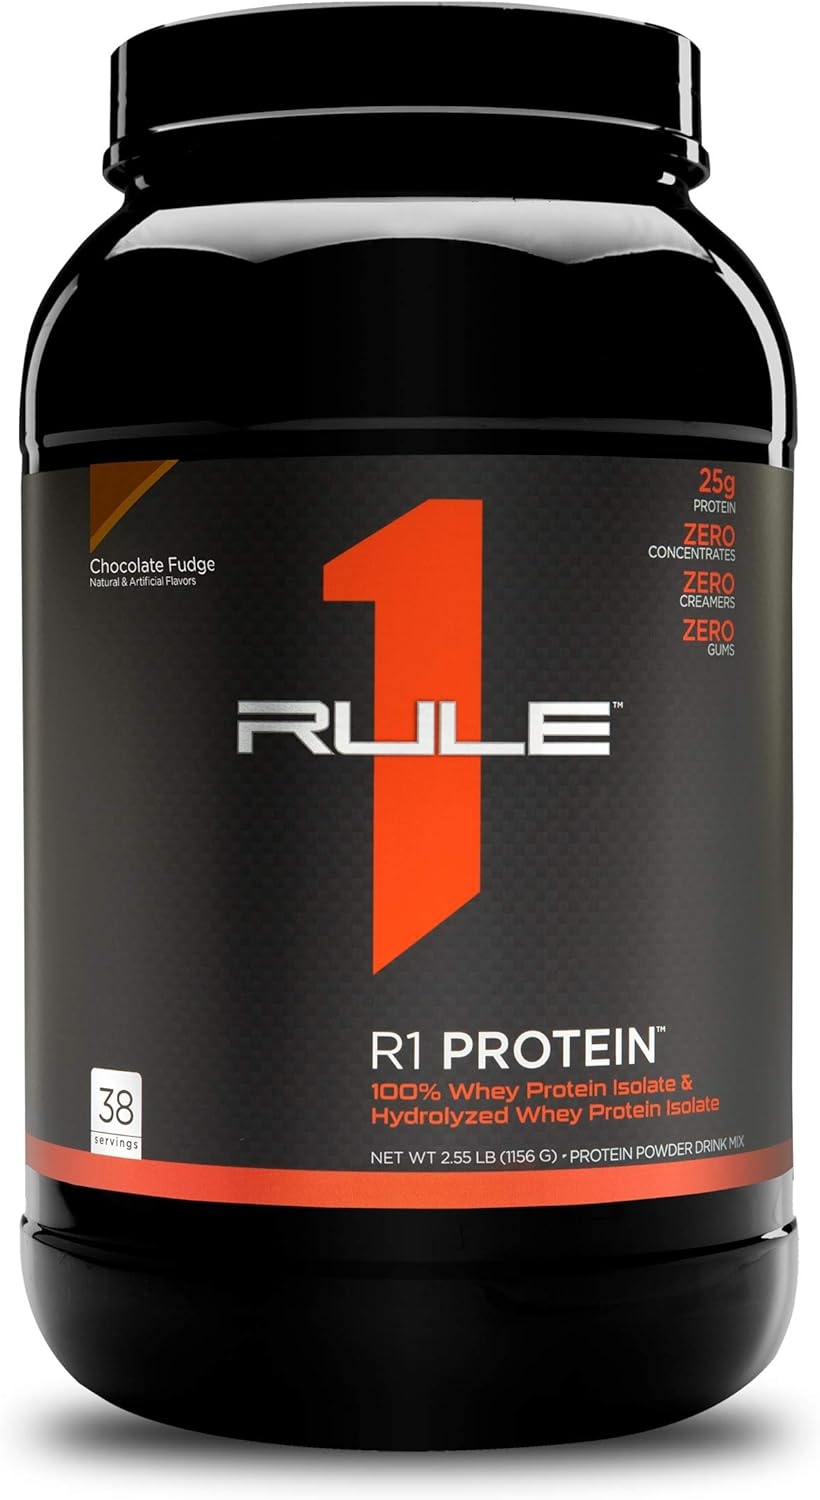 Rule One Proteins, R1 Protein - Lightly Salted Caramel, 25g Fast-Acting, Super-Pure 100% Isolate and Hydrolysate Protein Powder with 6g BCAAs for Muscle Growth and Recovery, 5 Pounds, 76 Servings